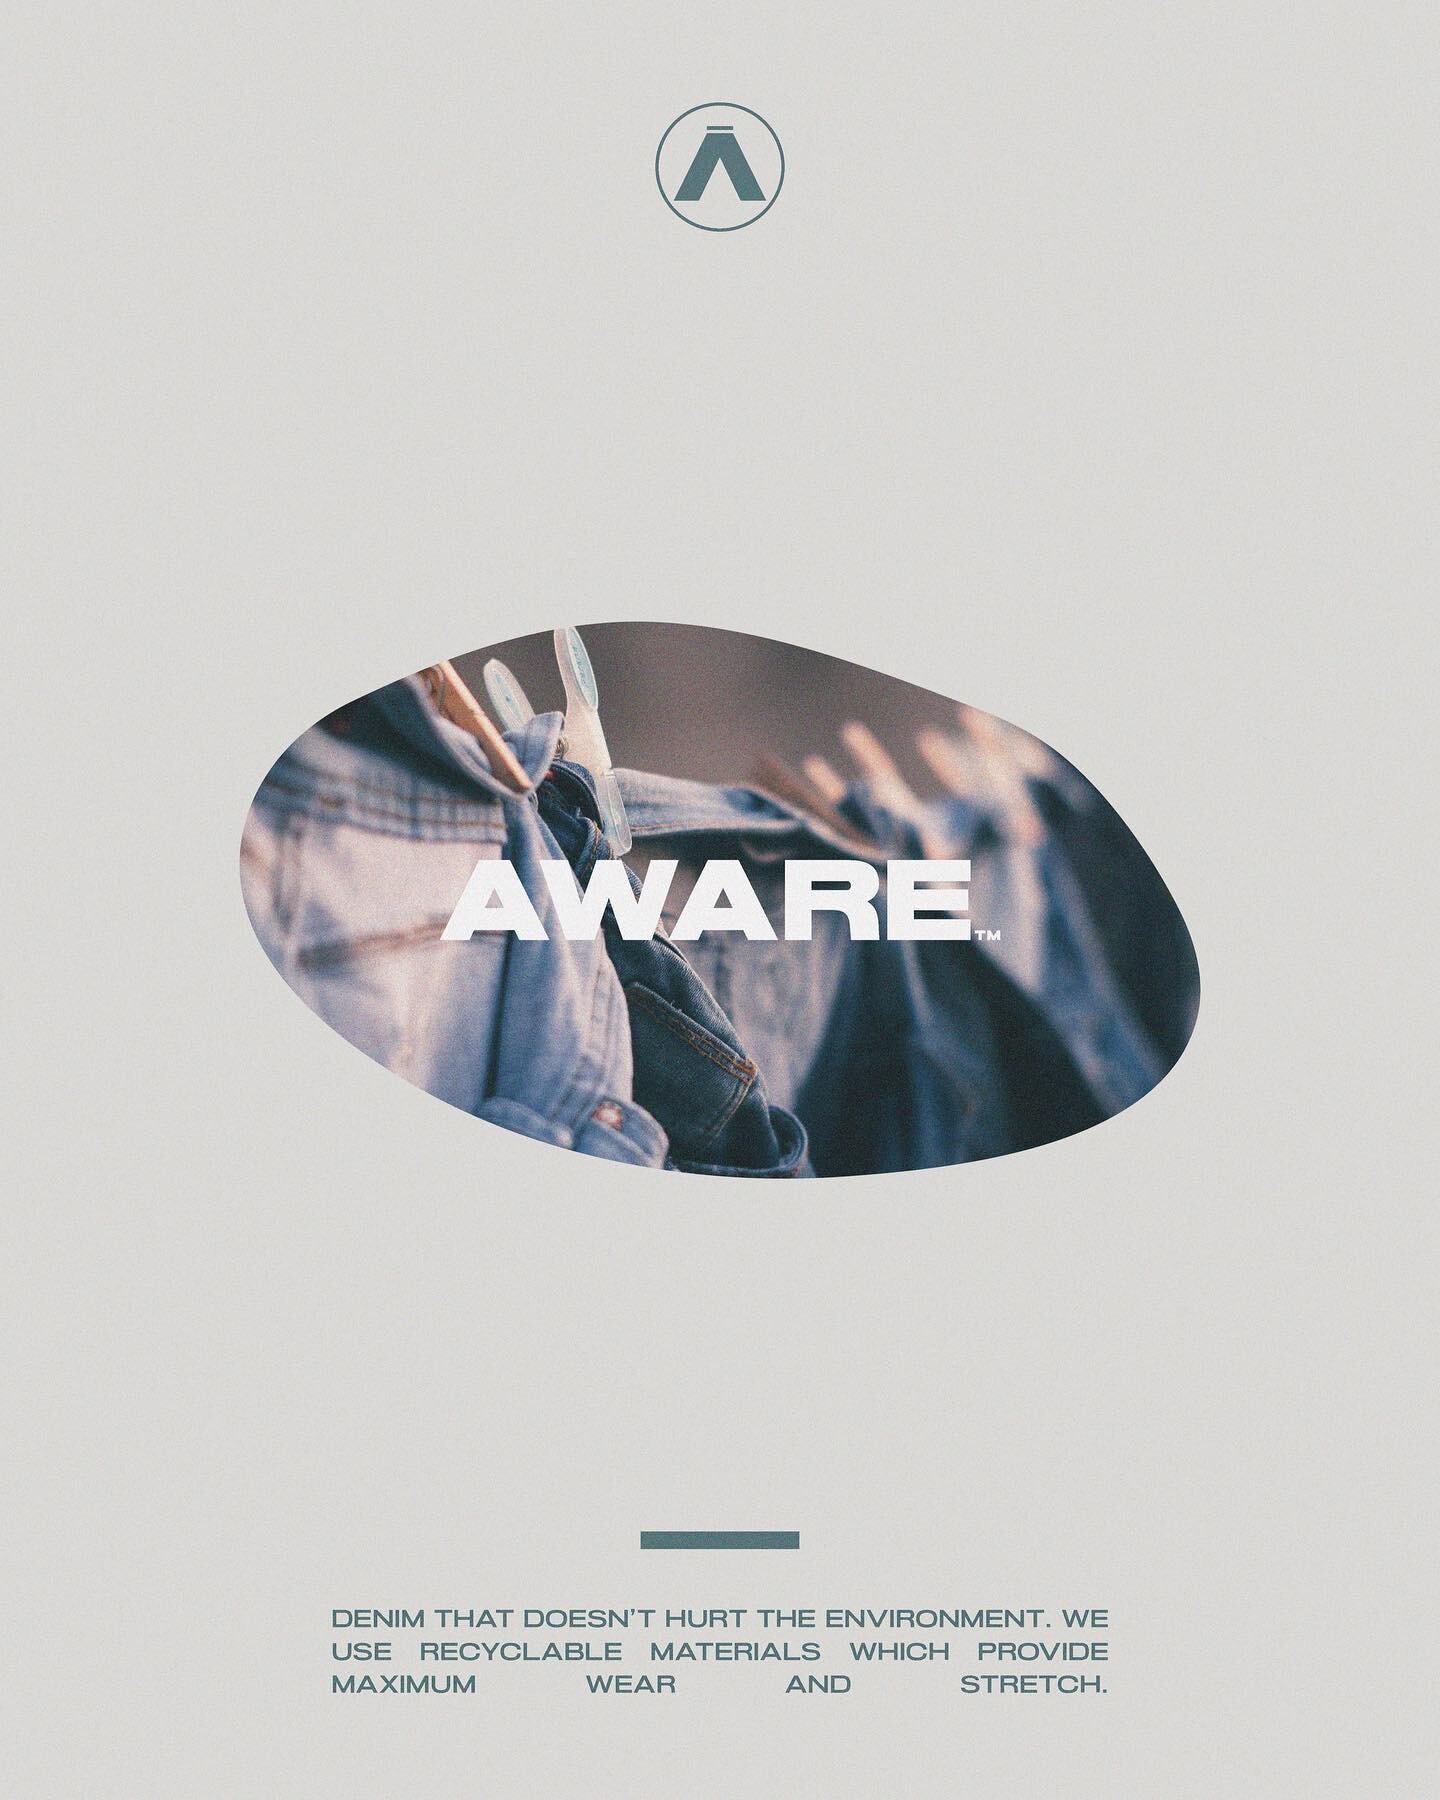 Design application for Aware ✨
Denim made from recyclable materials. 

Aware&rsquo;s goal is to create a more eco-friendly solution to denim clothes, and encourage people to be more 𝘢𝘸𝘢𝘳𝘦 𝘰𝘧 𝘸𝘩𝘢𝘵 𝘵𝘩𝘦𝘺 𝘸𝘦𝘢𝘳, specifically how their c